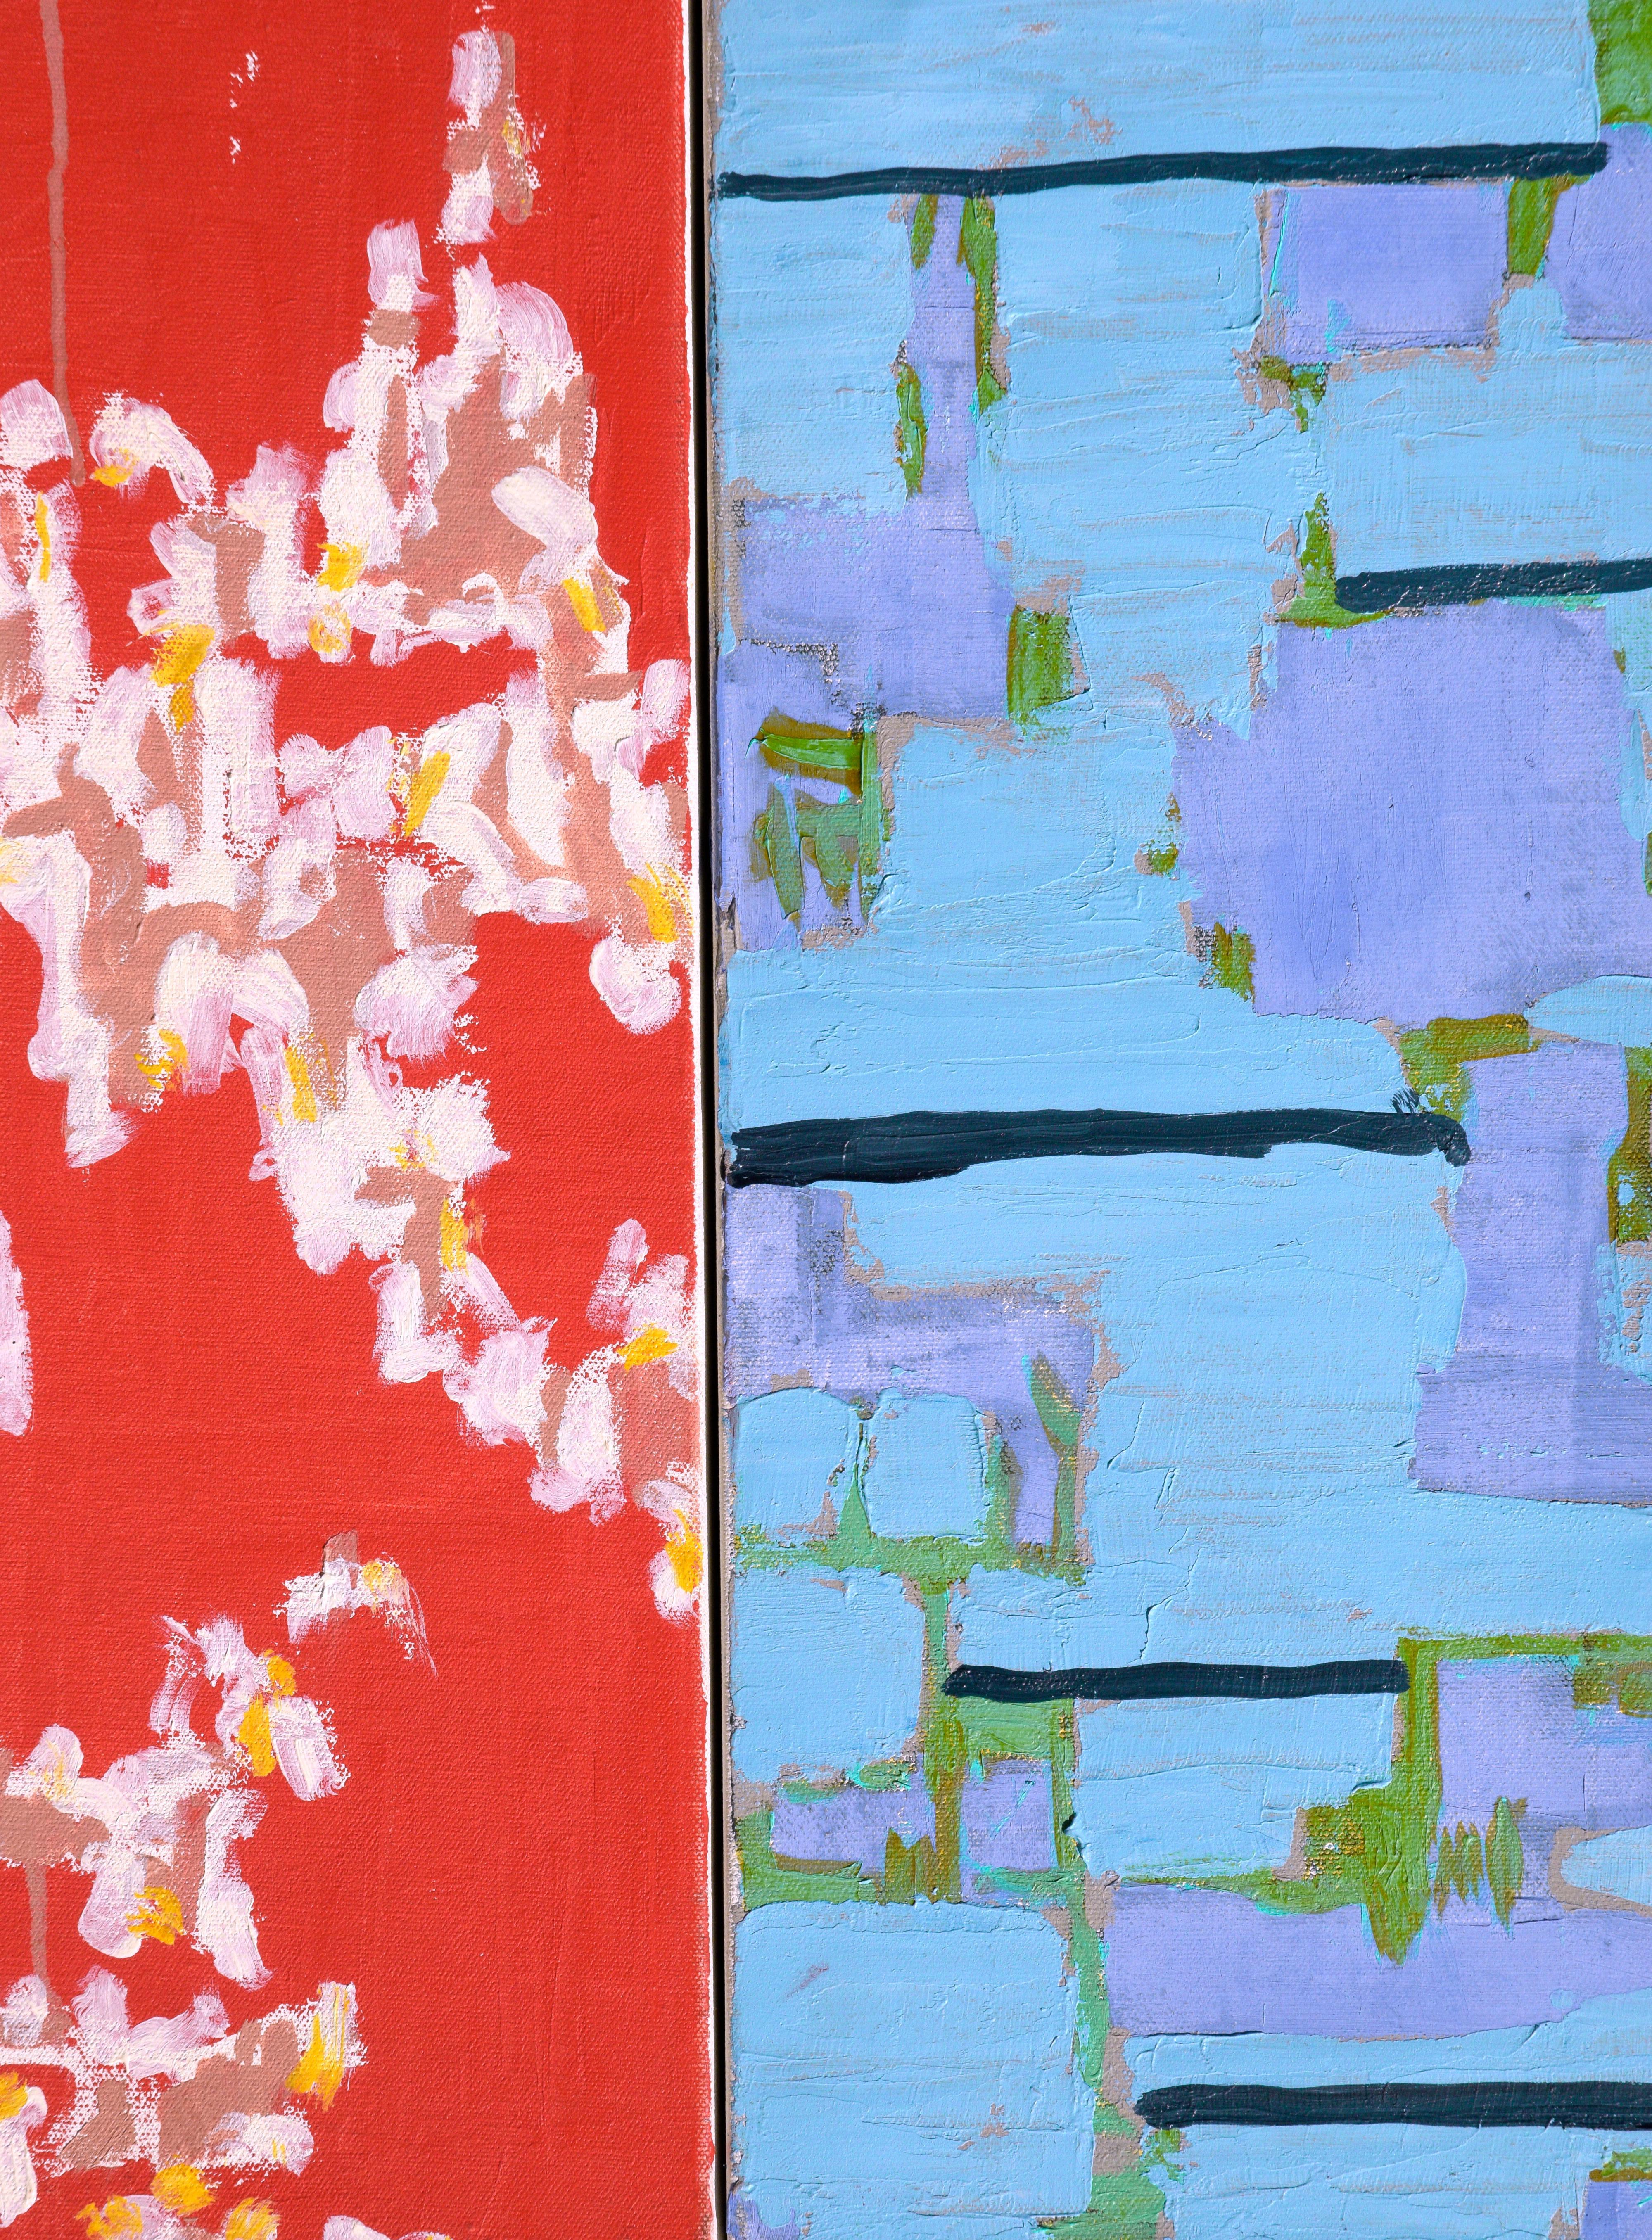 Contemporary Two-Part Abstract: Blue and Red - Abstract Expressionist Painting by Michael Pauker 